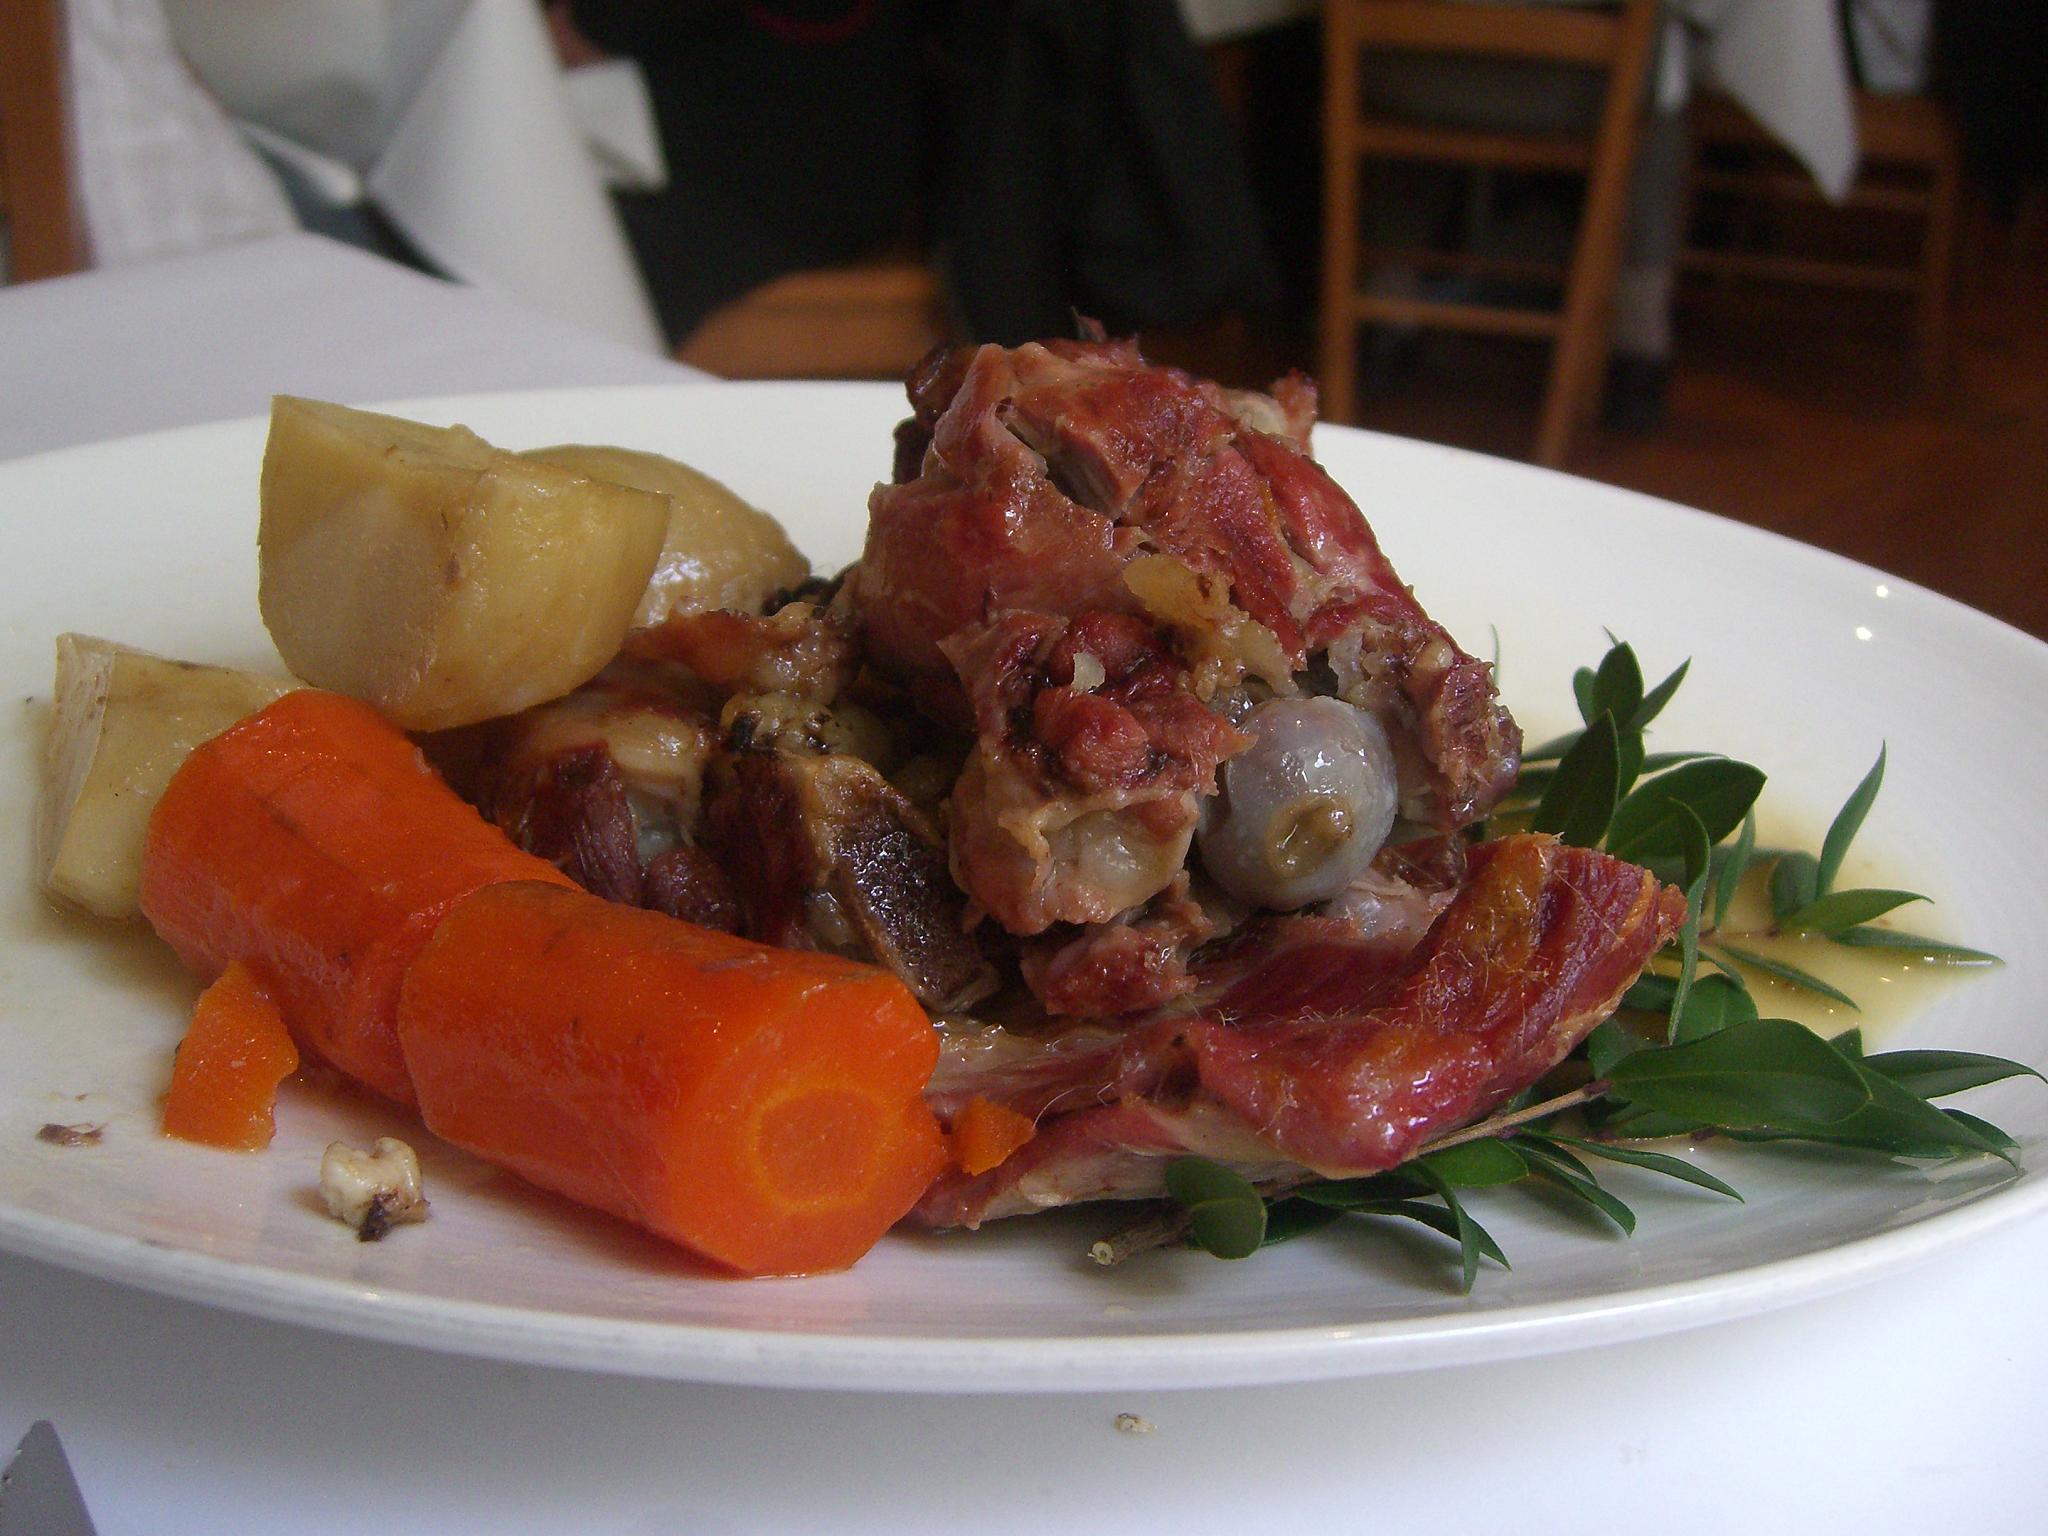 Carne de cabra is an excellent dish that is indicative of the food in Gran Canaria - decadent and amazing!